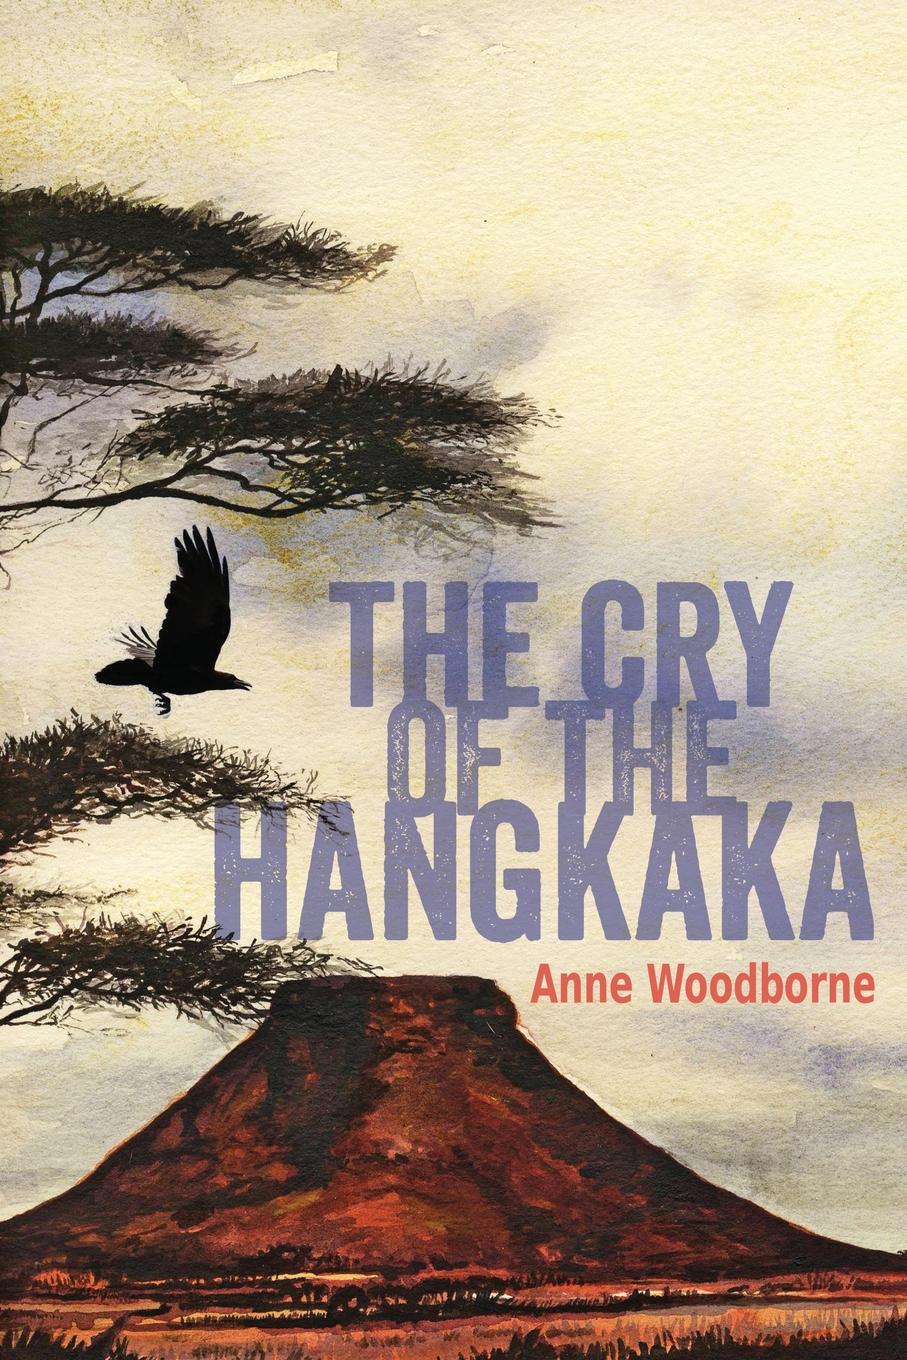 The-Cry-of-the-Hangkaka